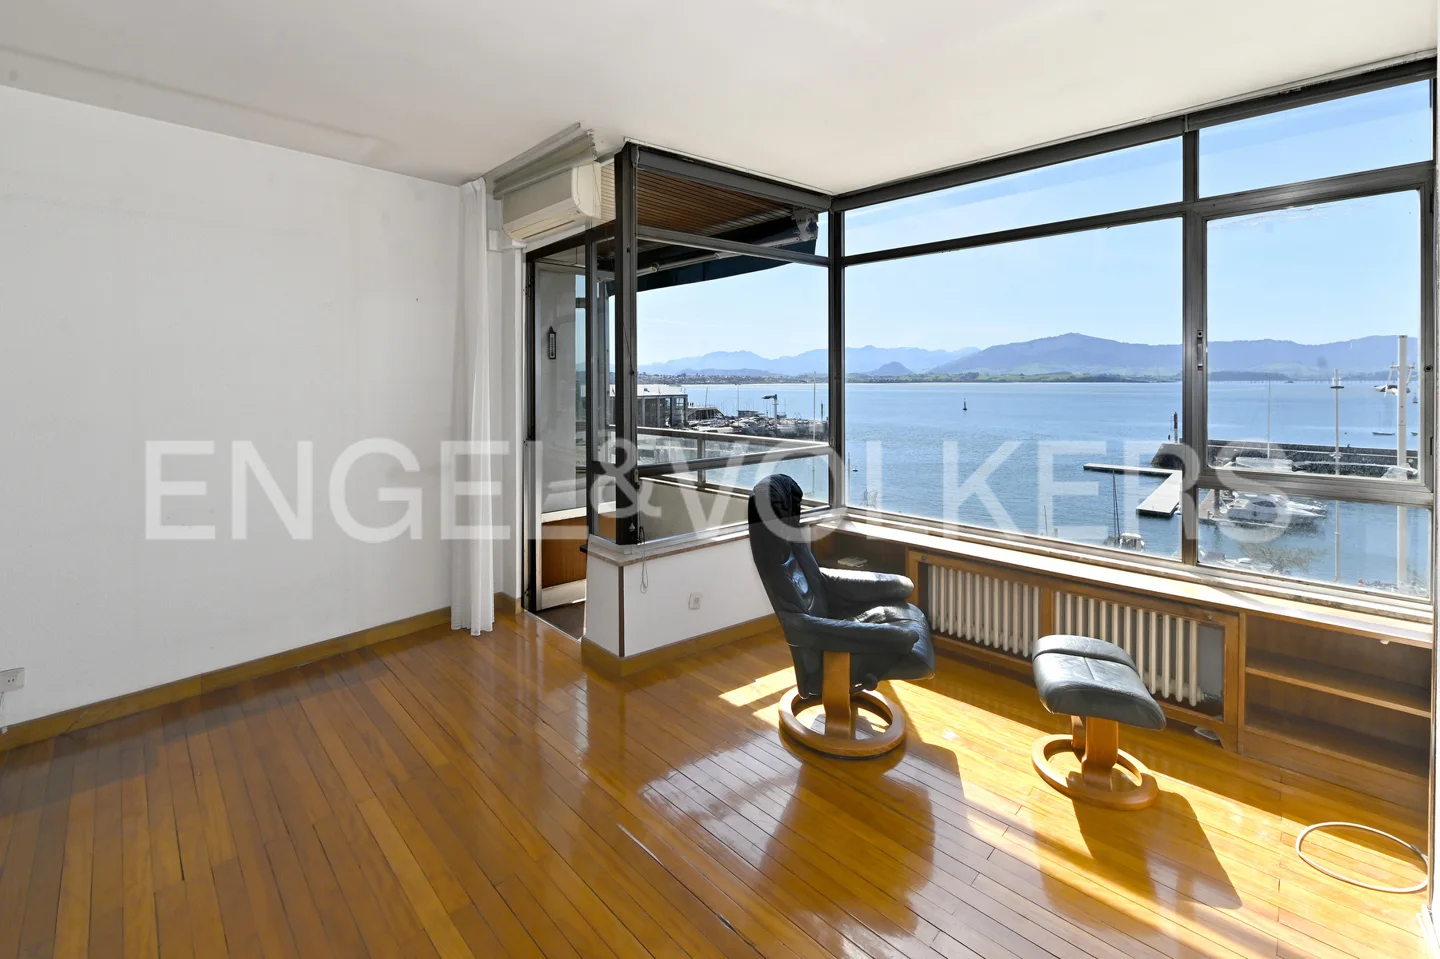 Apartment in Castelar with excellent views of the bay